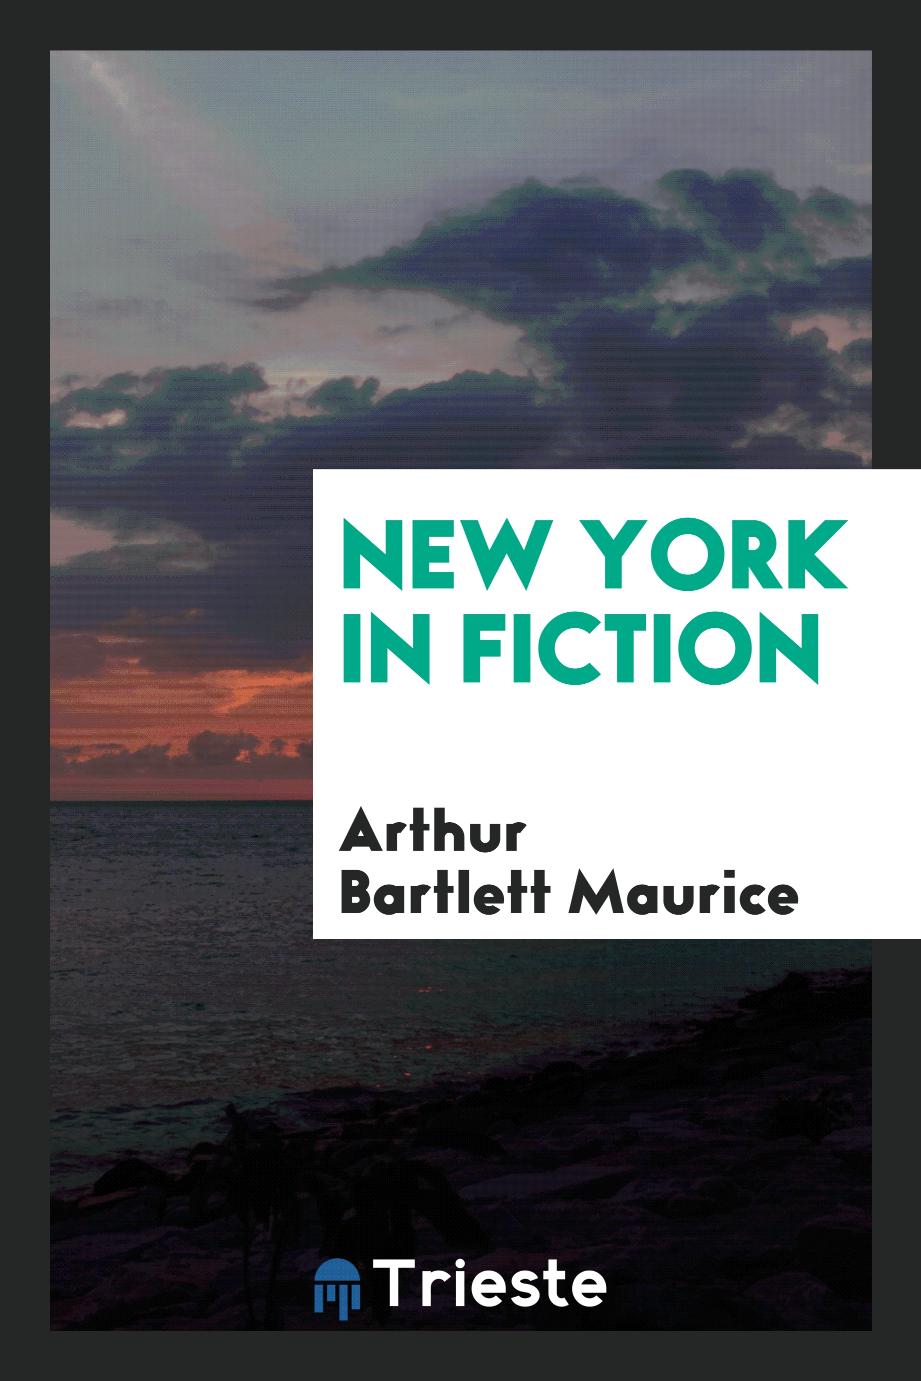 New York in fiction